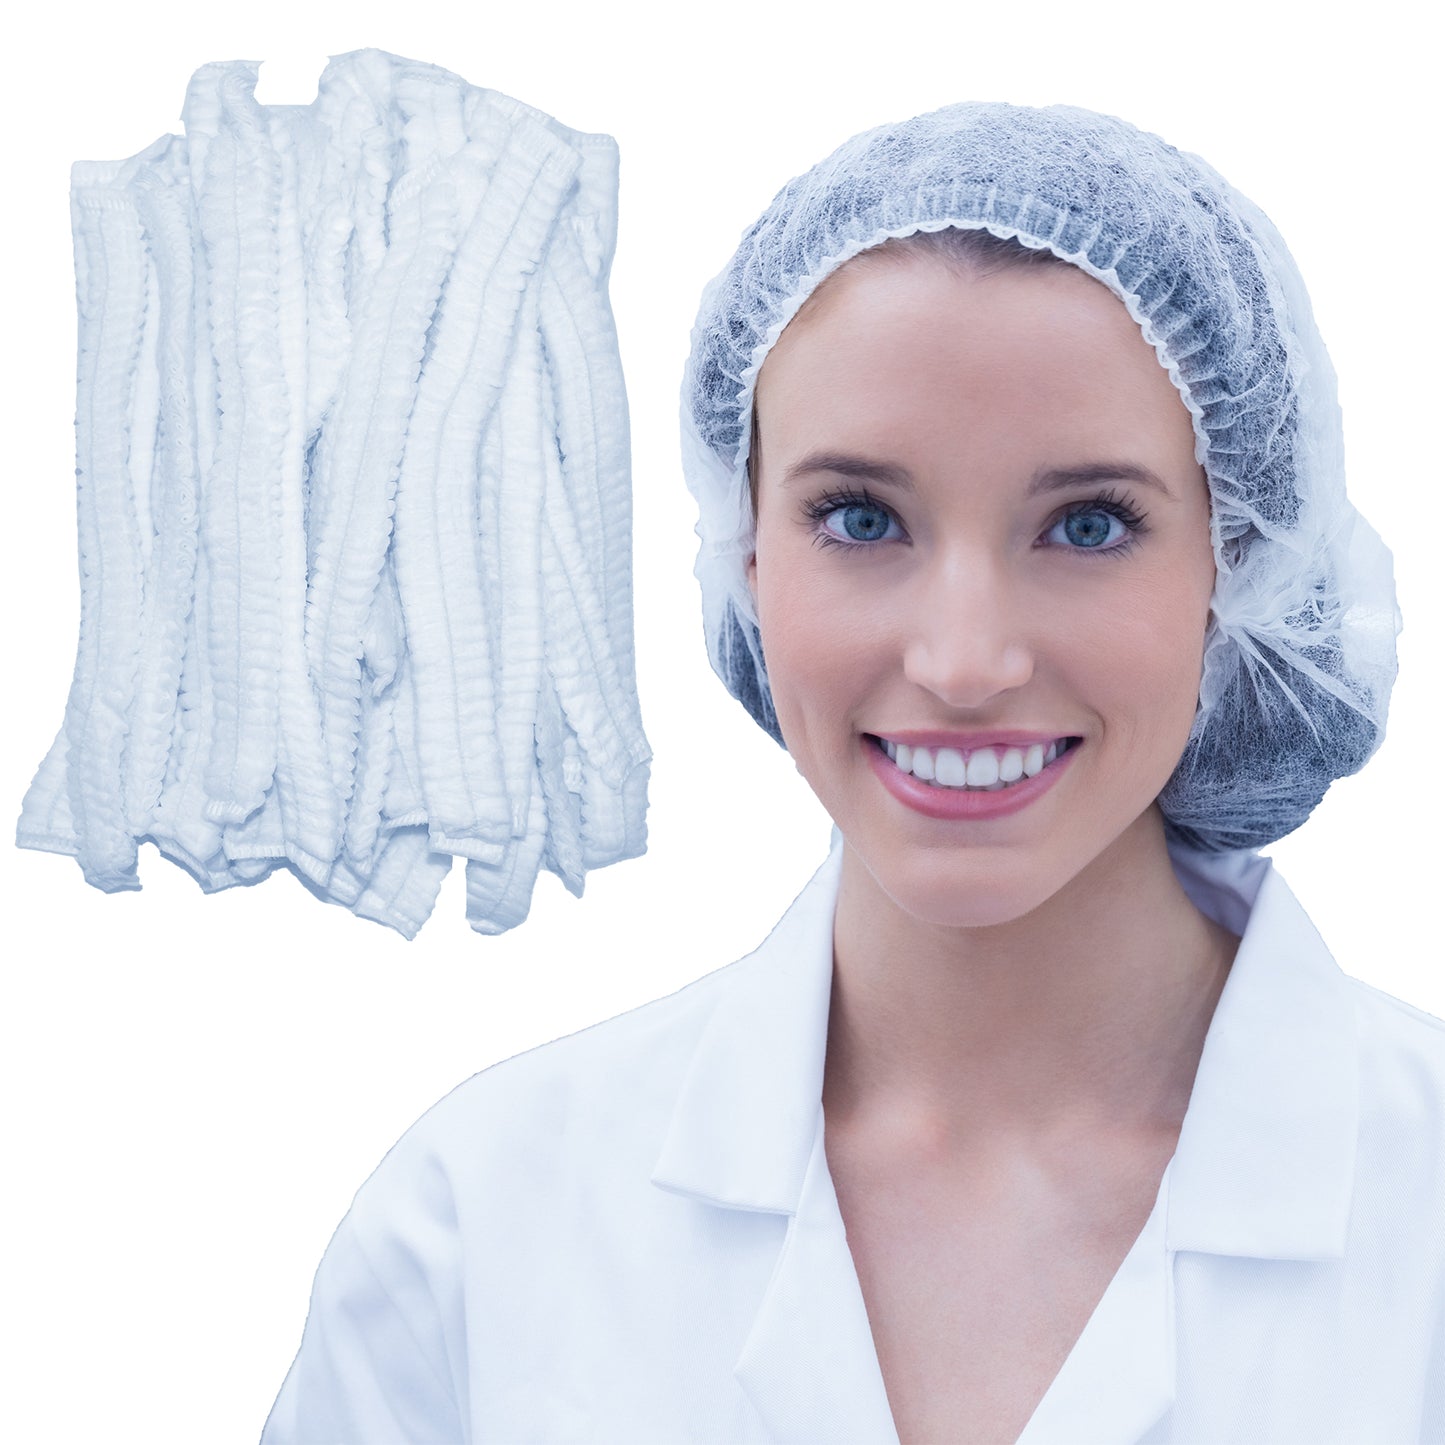 100 Pack - 21" Disposable Bouffant Hair Nets, High Quality Breathable Material, Used in Food Service, Laboratories, Manufacturing, Beauty Salon - 100 Pieces